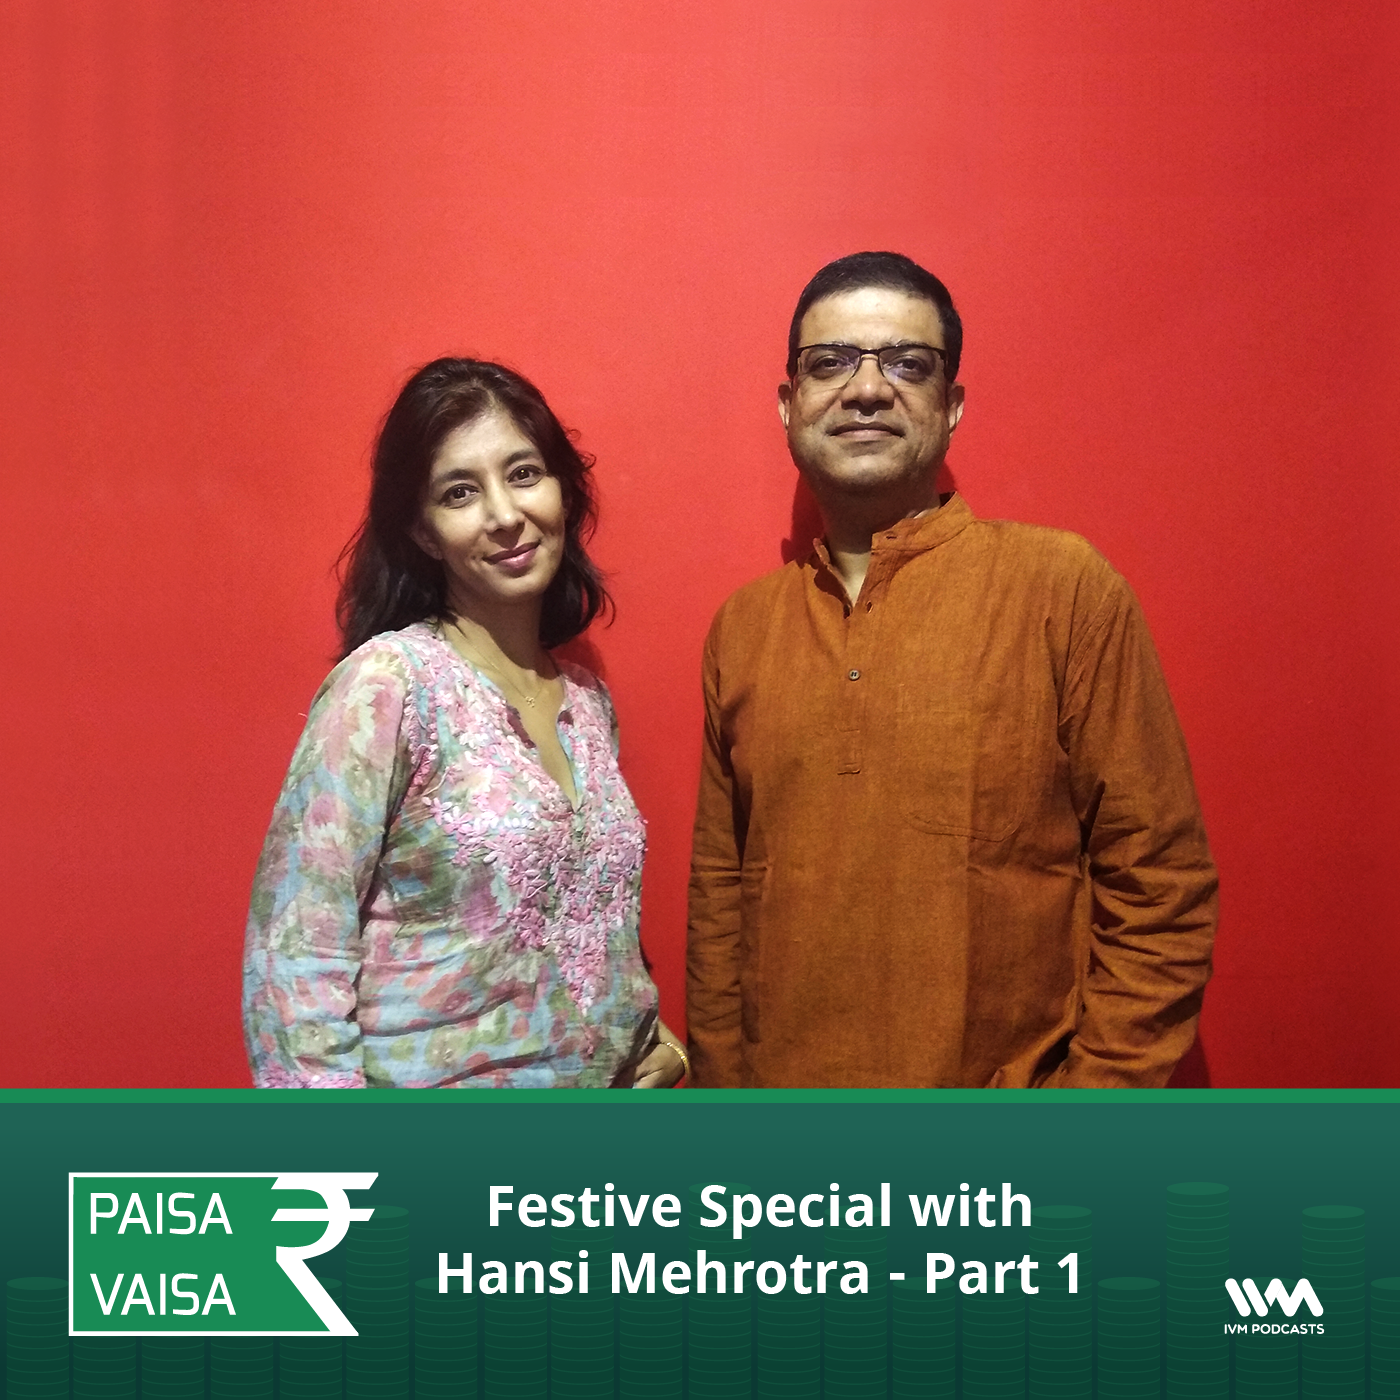 Ep. 157: Festive Special with Hansi Mehrotra - Part 1